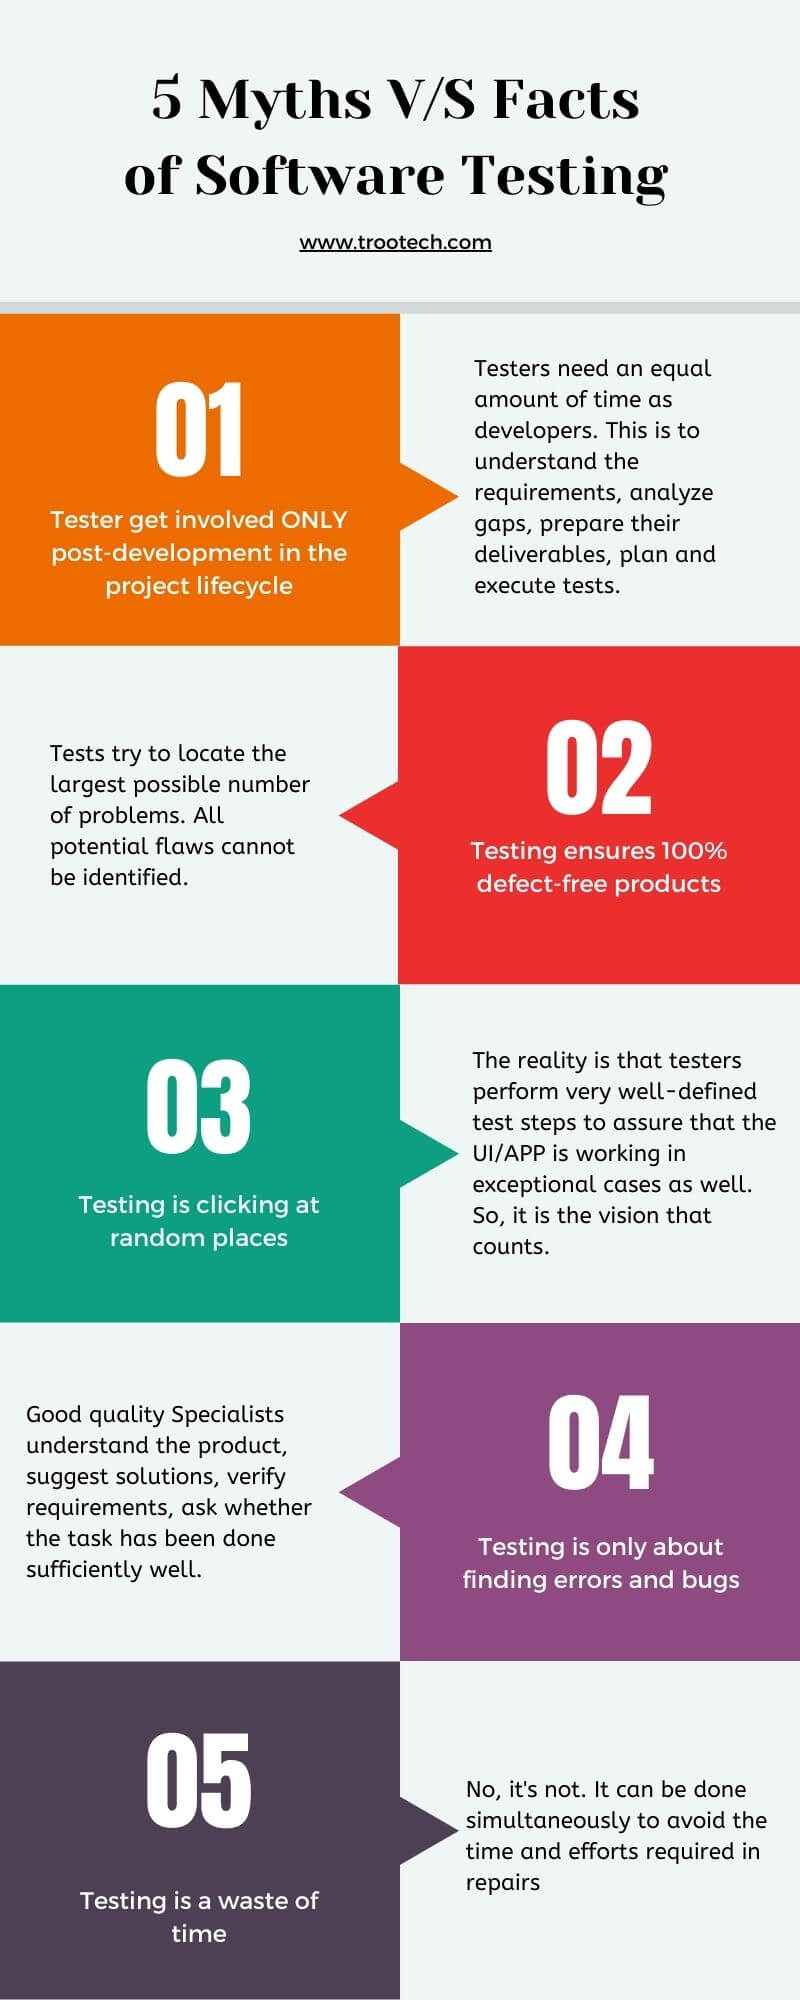 myths-and-facts-types-of-software-testing-trootech-business-solutions.jpg